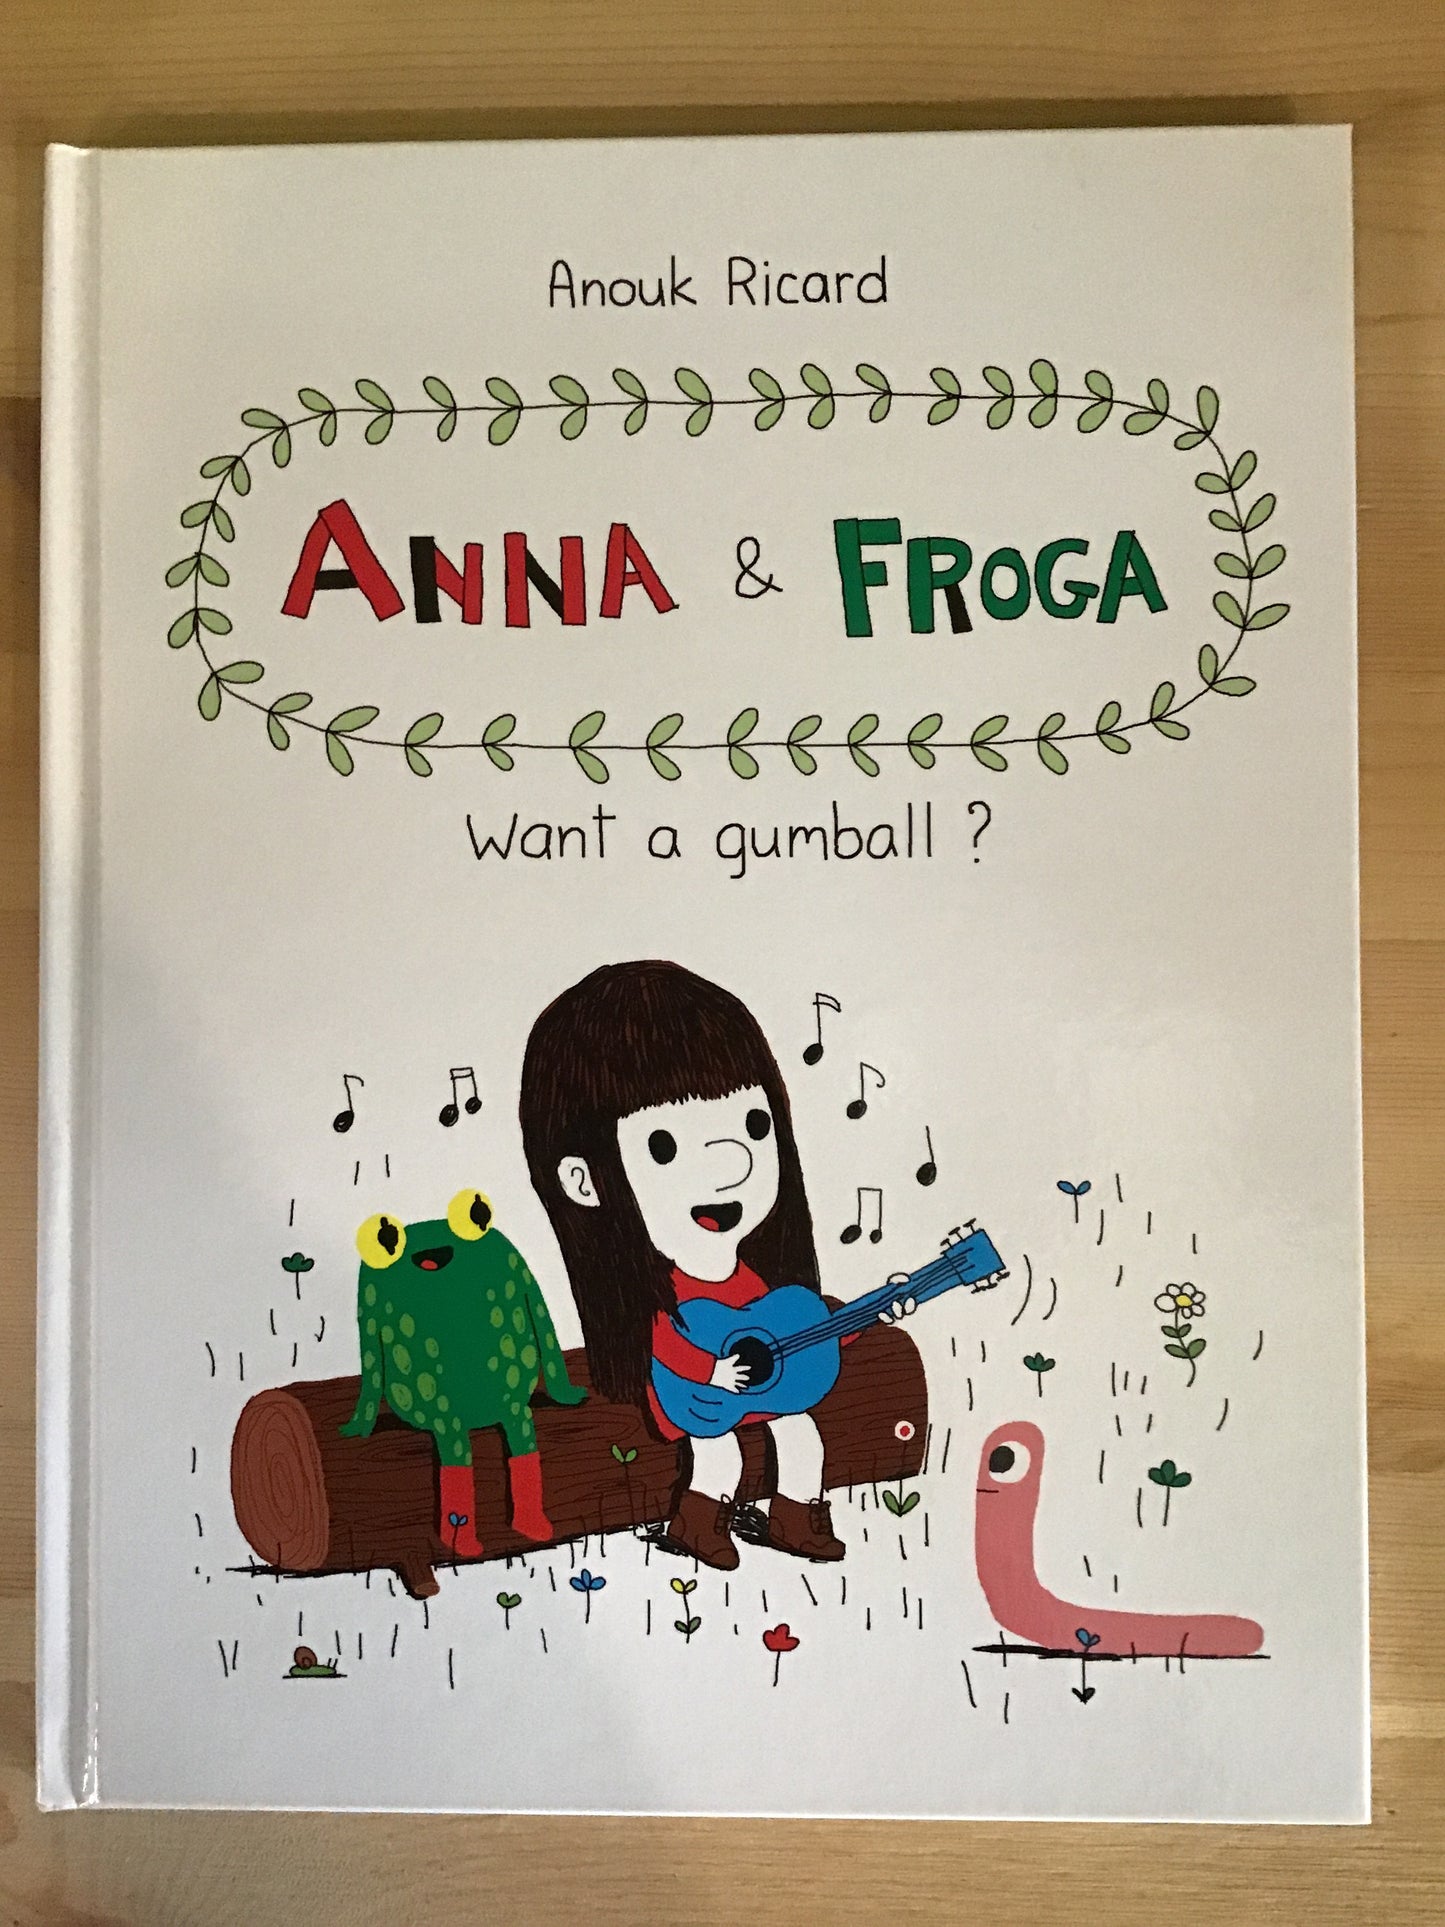 Anna & Froga: Want a gumball?